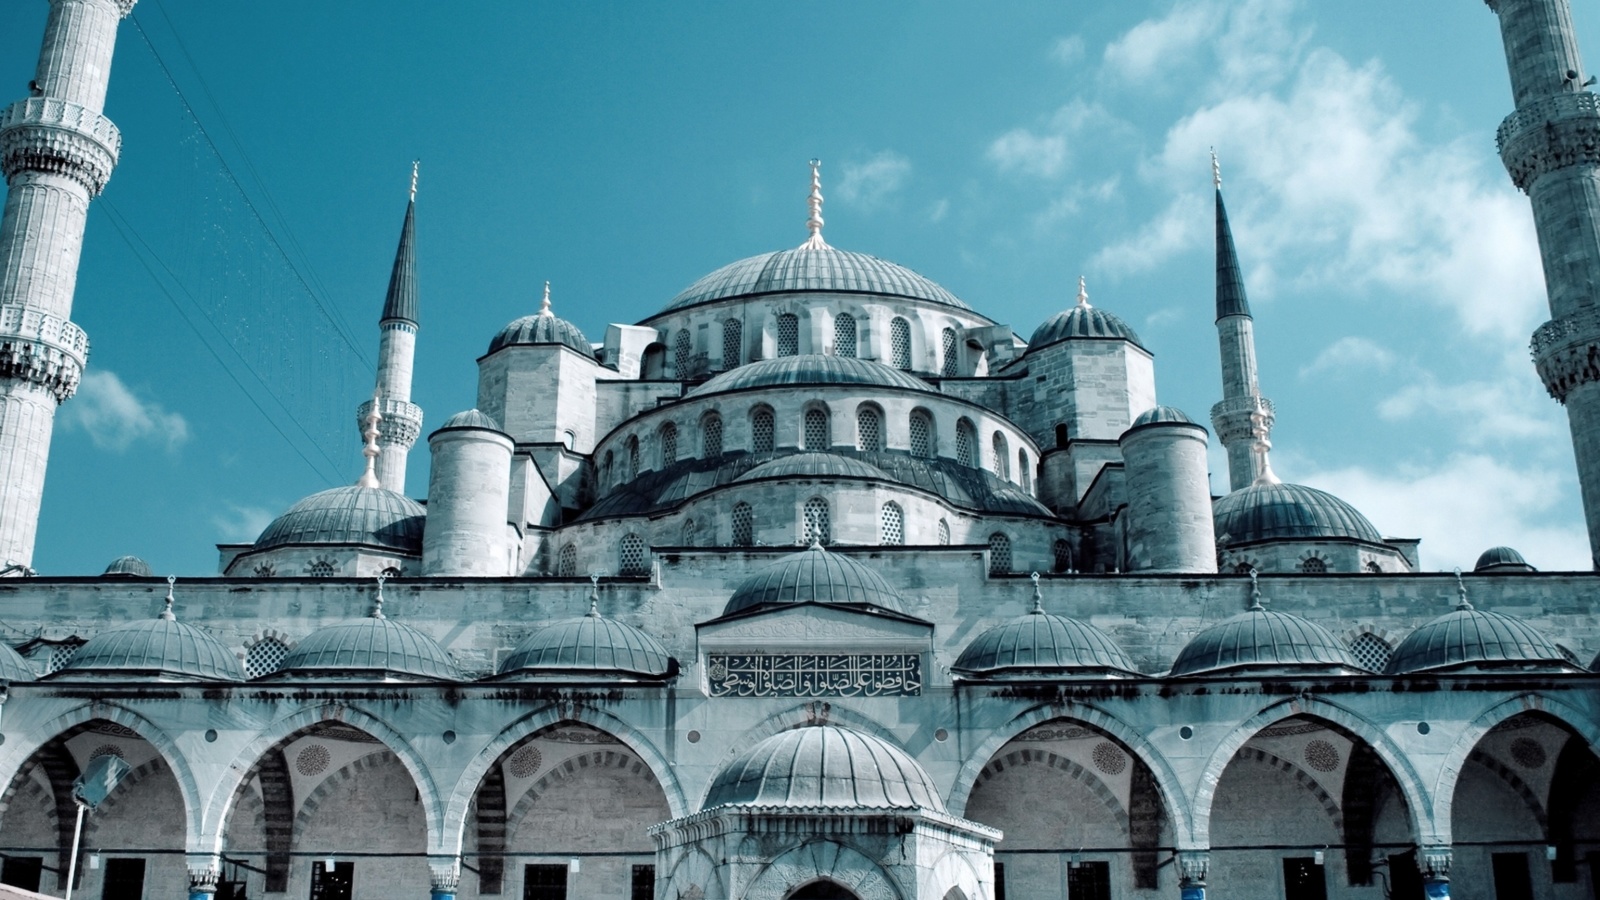 Sultan Ahmed Mosque in Istanbul wallpaper 1600x900